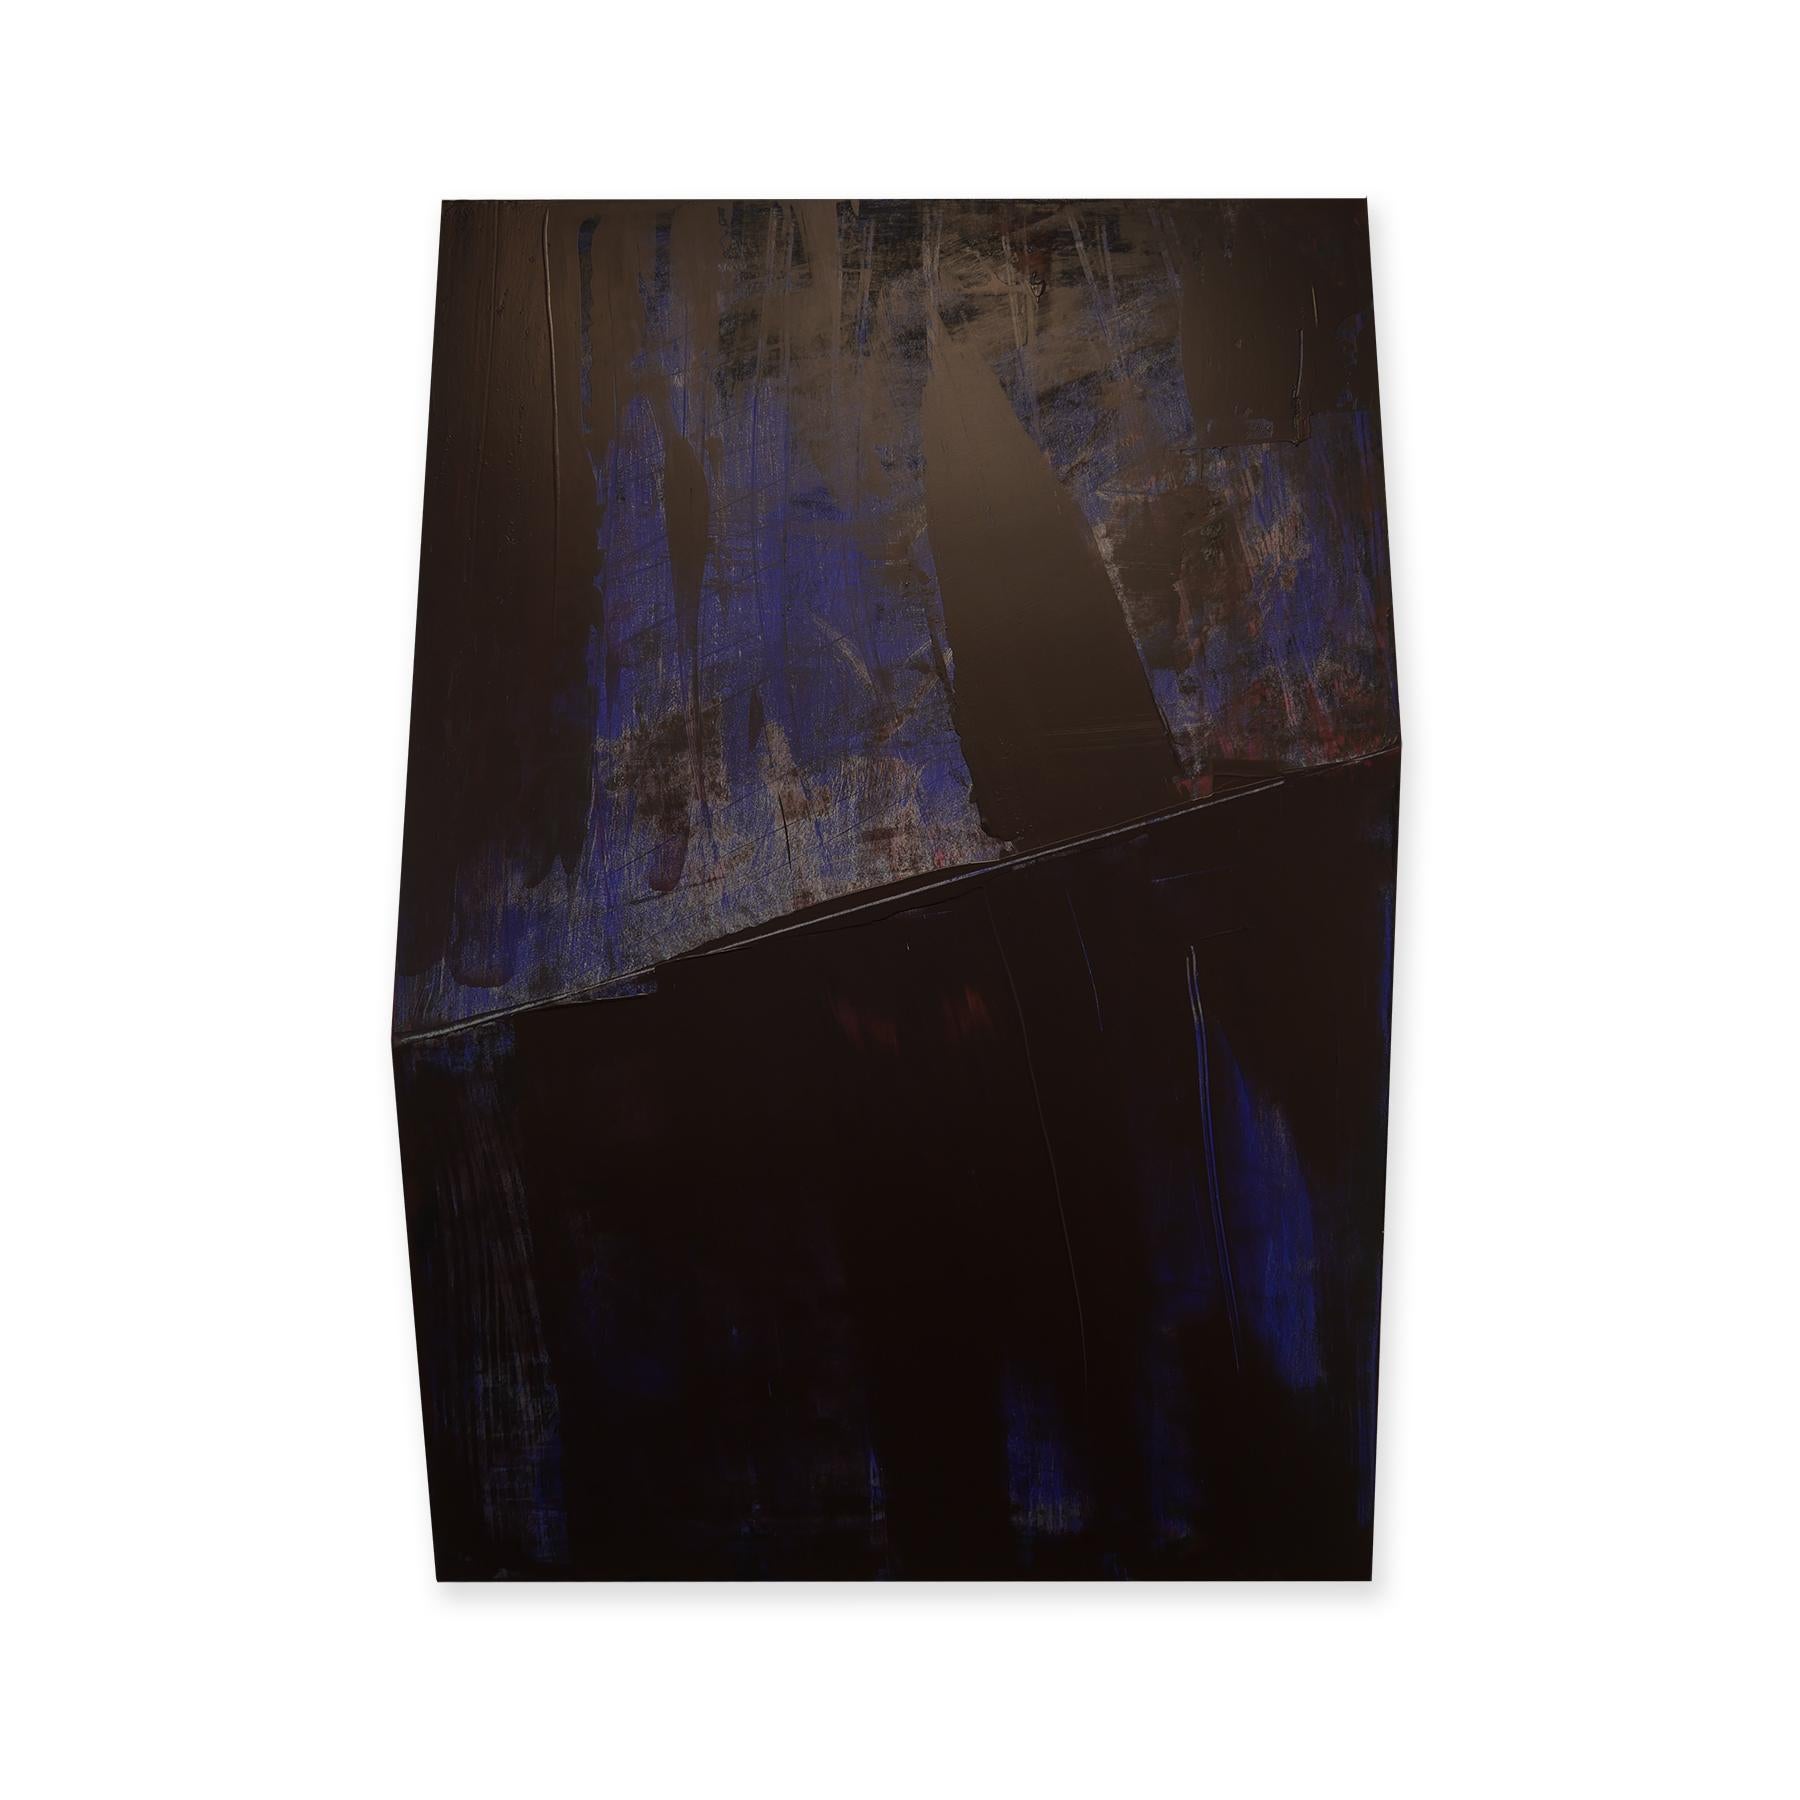 Abstract wall sculpture featuring three dimensional geometric shapes painted with bright blue and black paint. The uniqueness of this blue does not derive from the ultramarine pigment, but rather from the matte, synthetic resin binder in which the